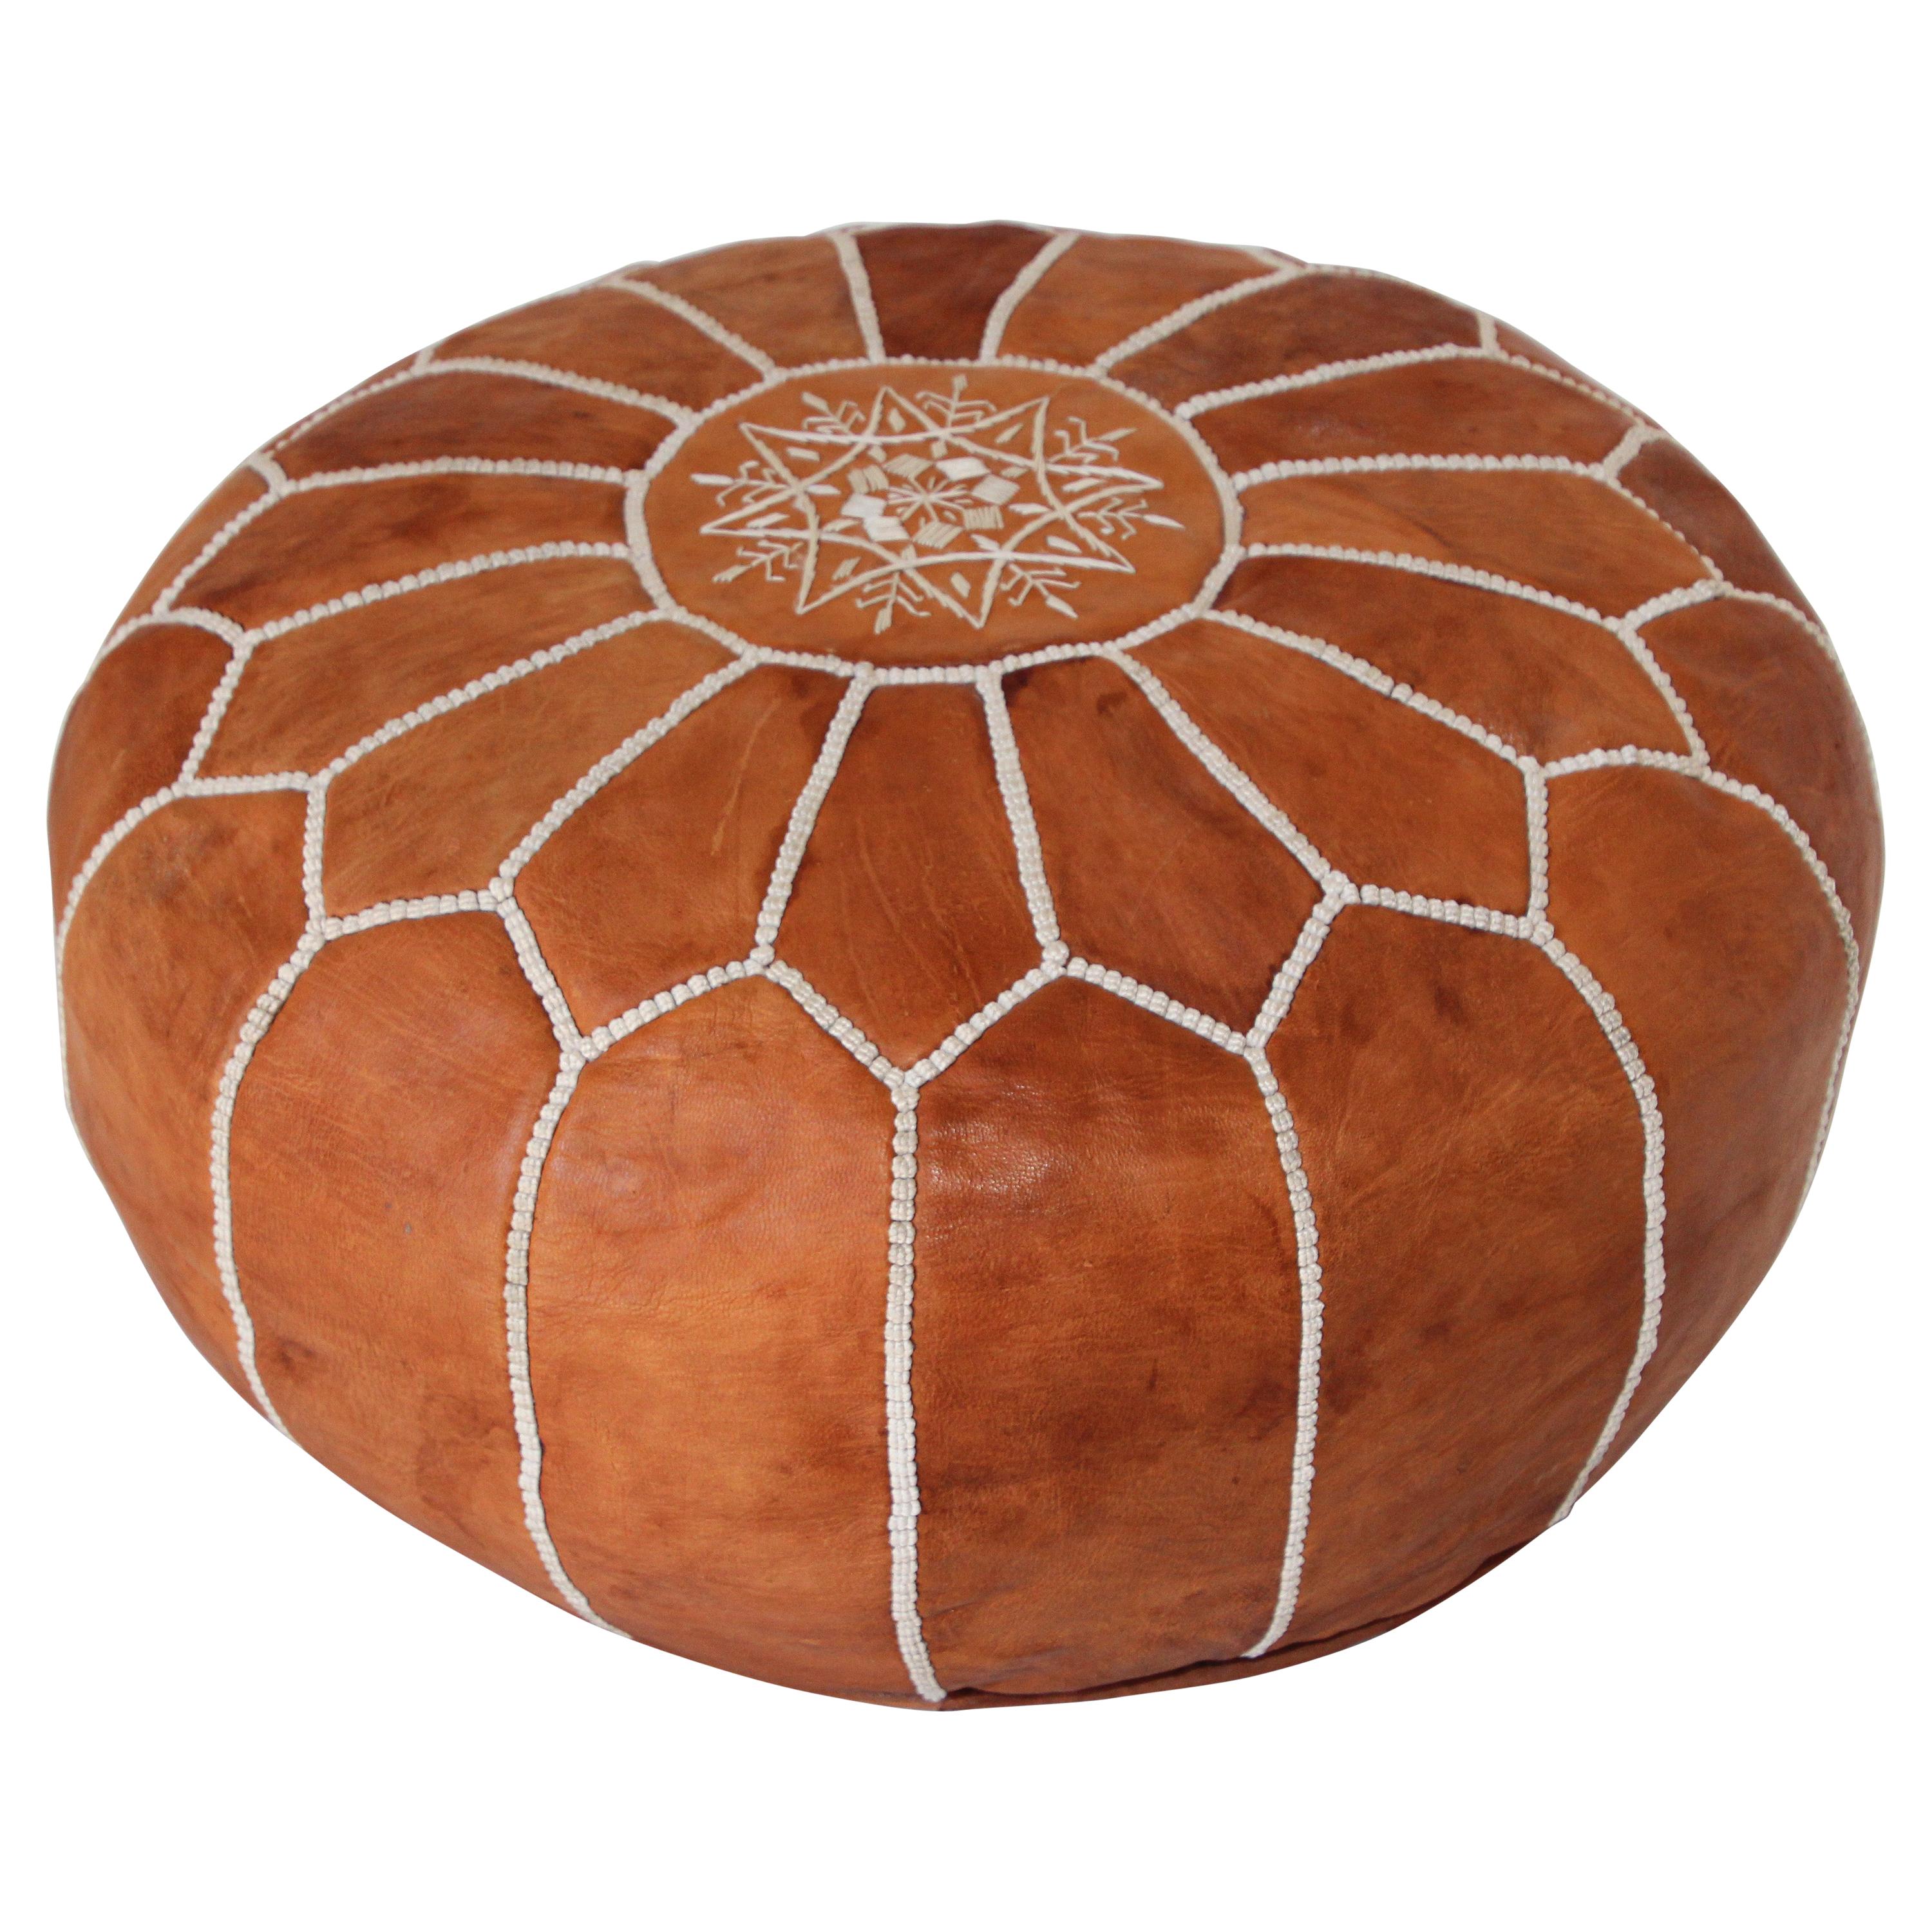 Vintage Moroccan Pouf Handcrafted Leather Stool